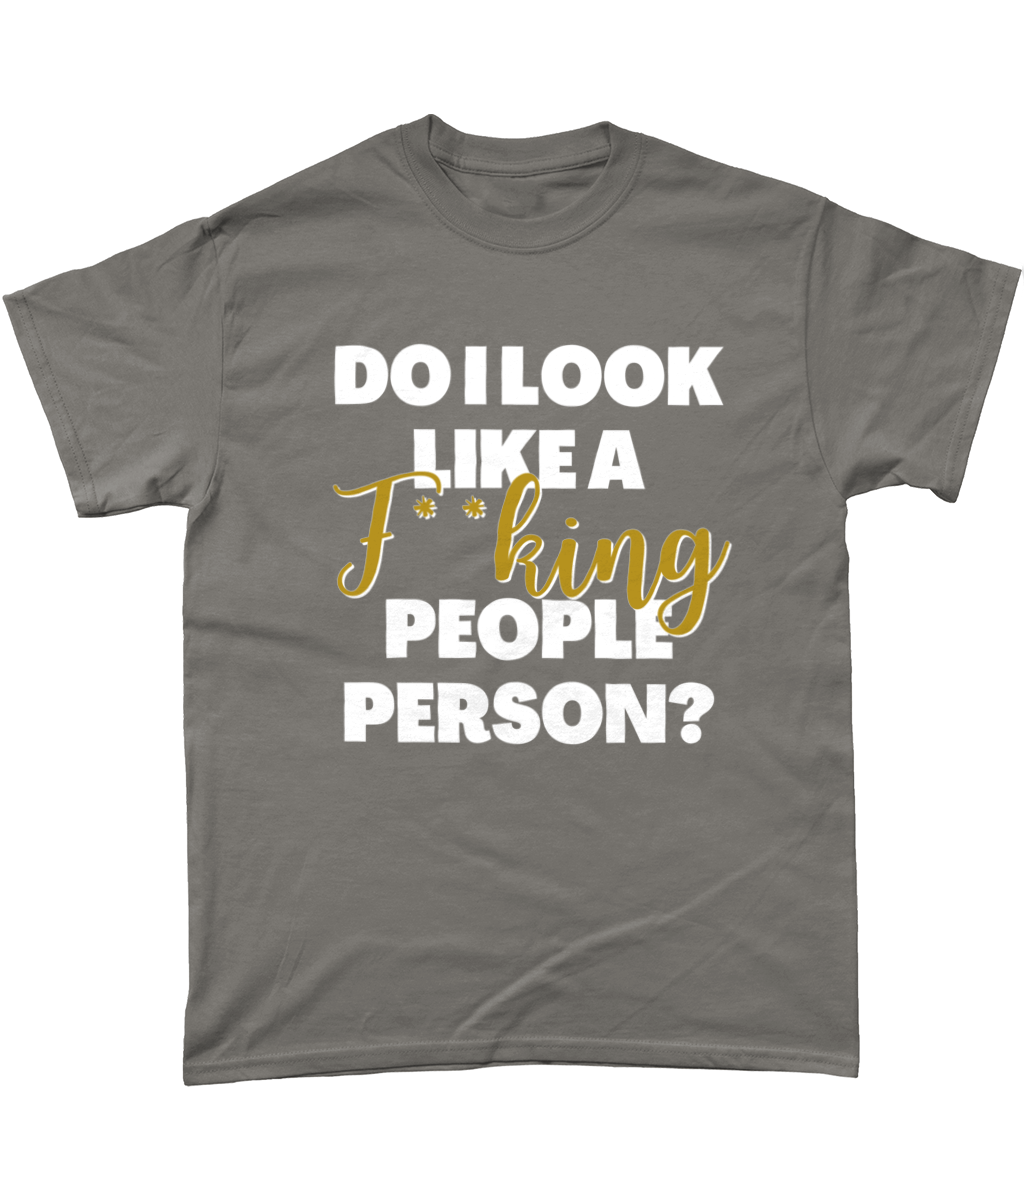 Do I look like a people person t-shirt